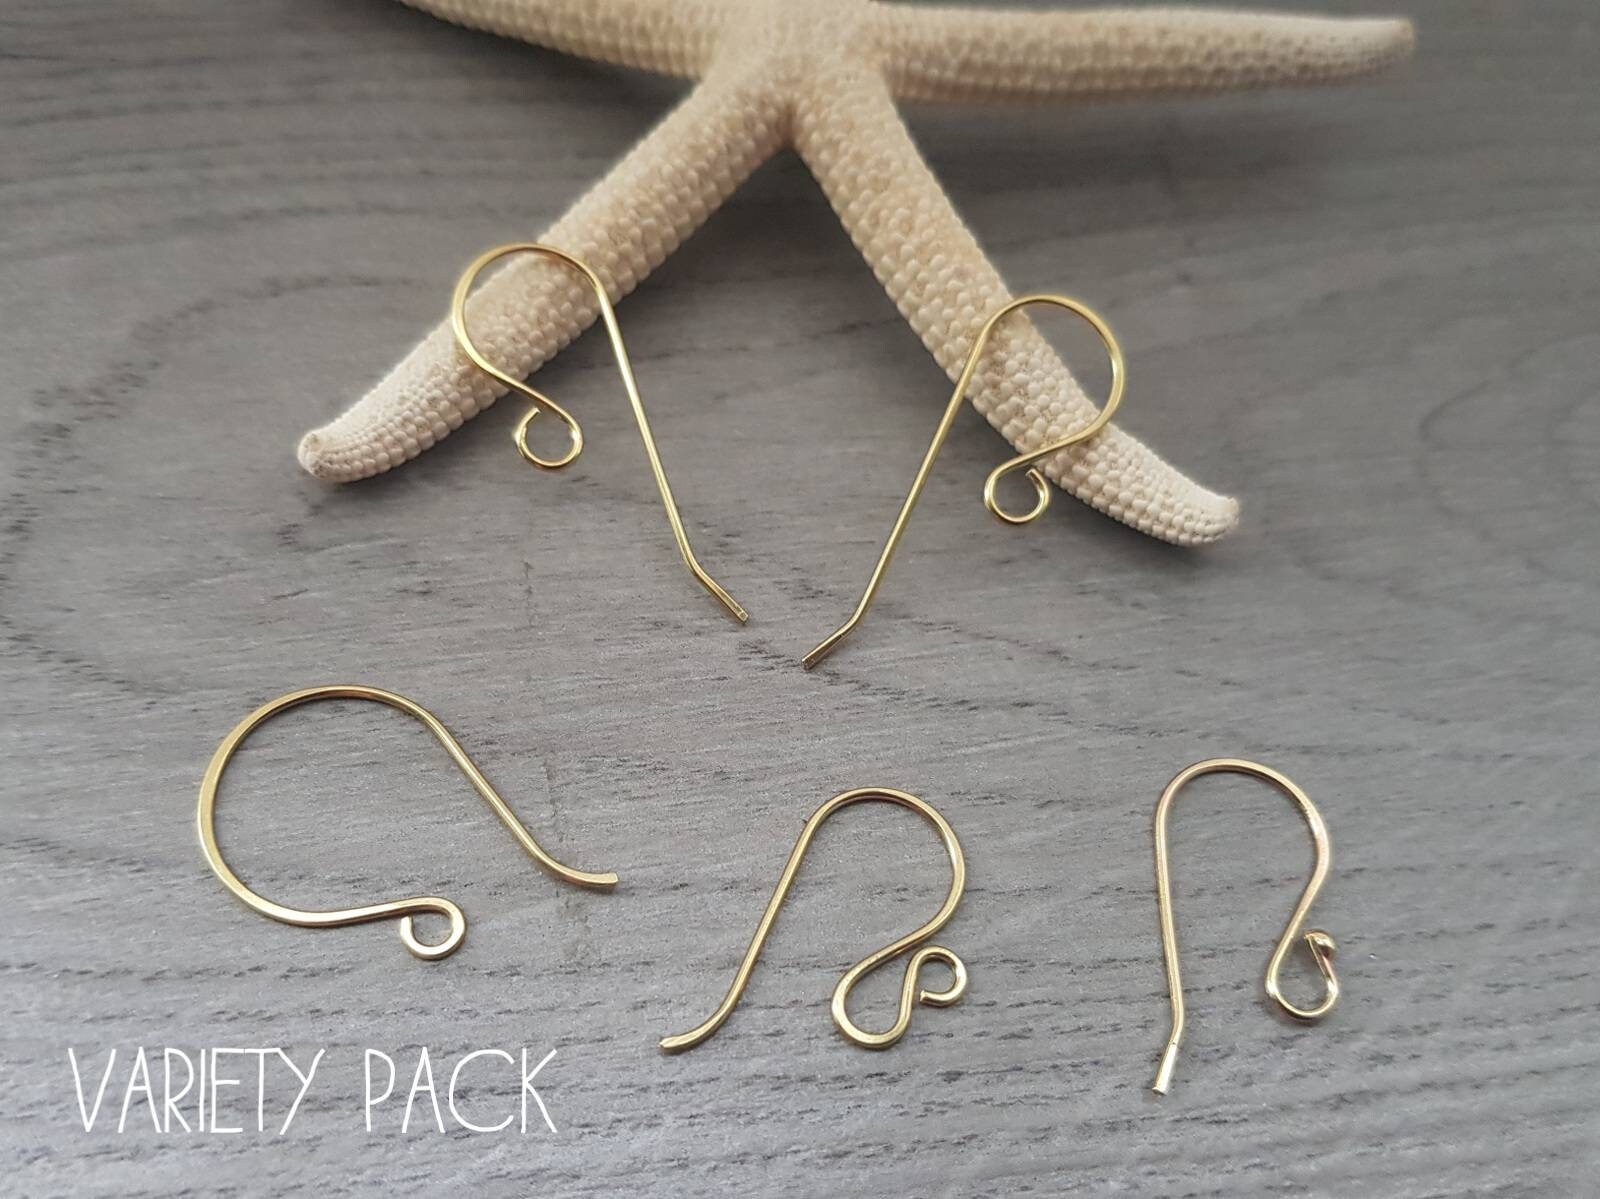 Variety Pack 6 Handmade Brass Ear Wires 4 Pairs 